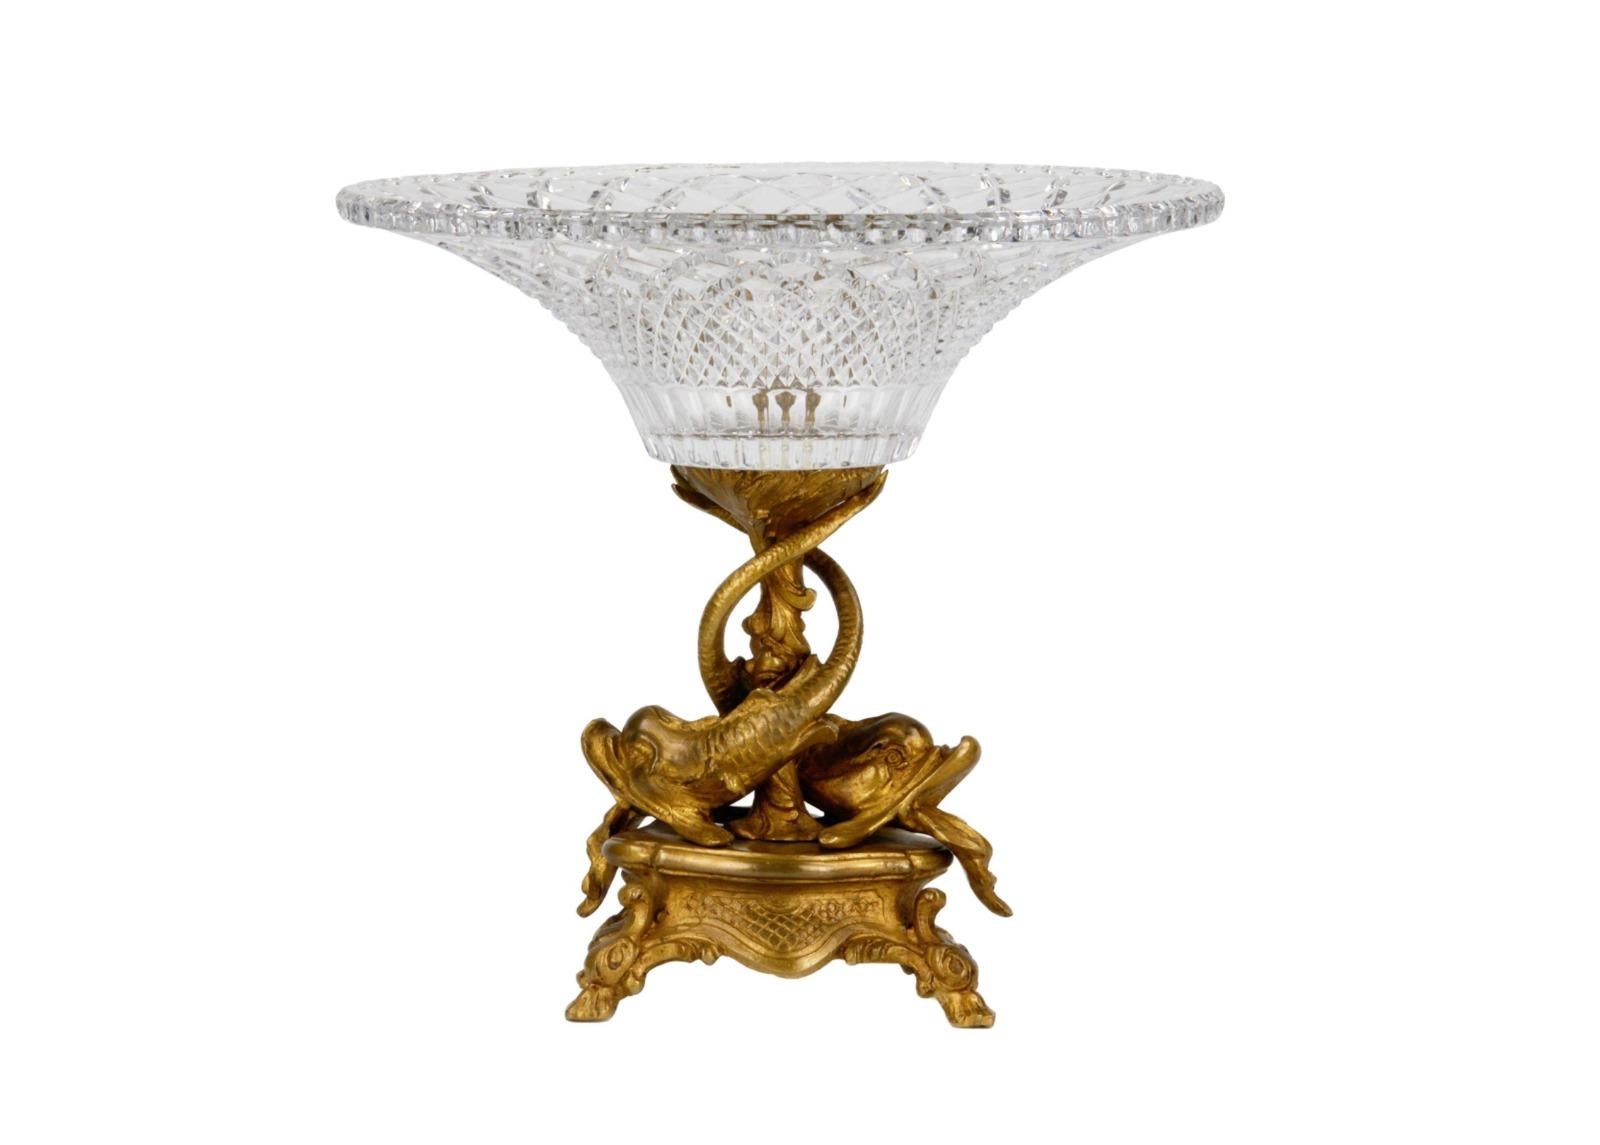 Large fruit vase Napoleon III - Empire 19th Century
made of crystal and bronze. 
A bright crystal flowerpot is mounted on a spiral rod formed by two swimming fish. French tan.
Width: 30cm, Height: 29cm, Depth: 30cm, Weight: 7kg,
Condition: Good,